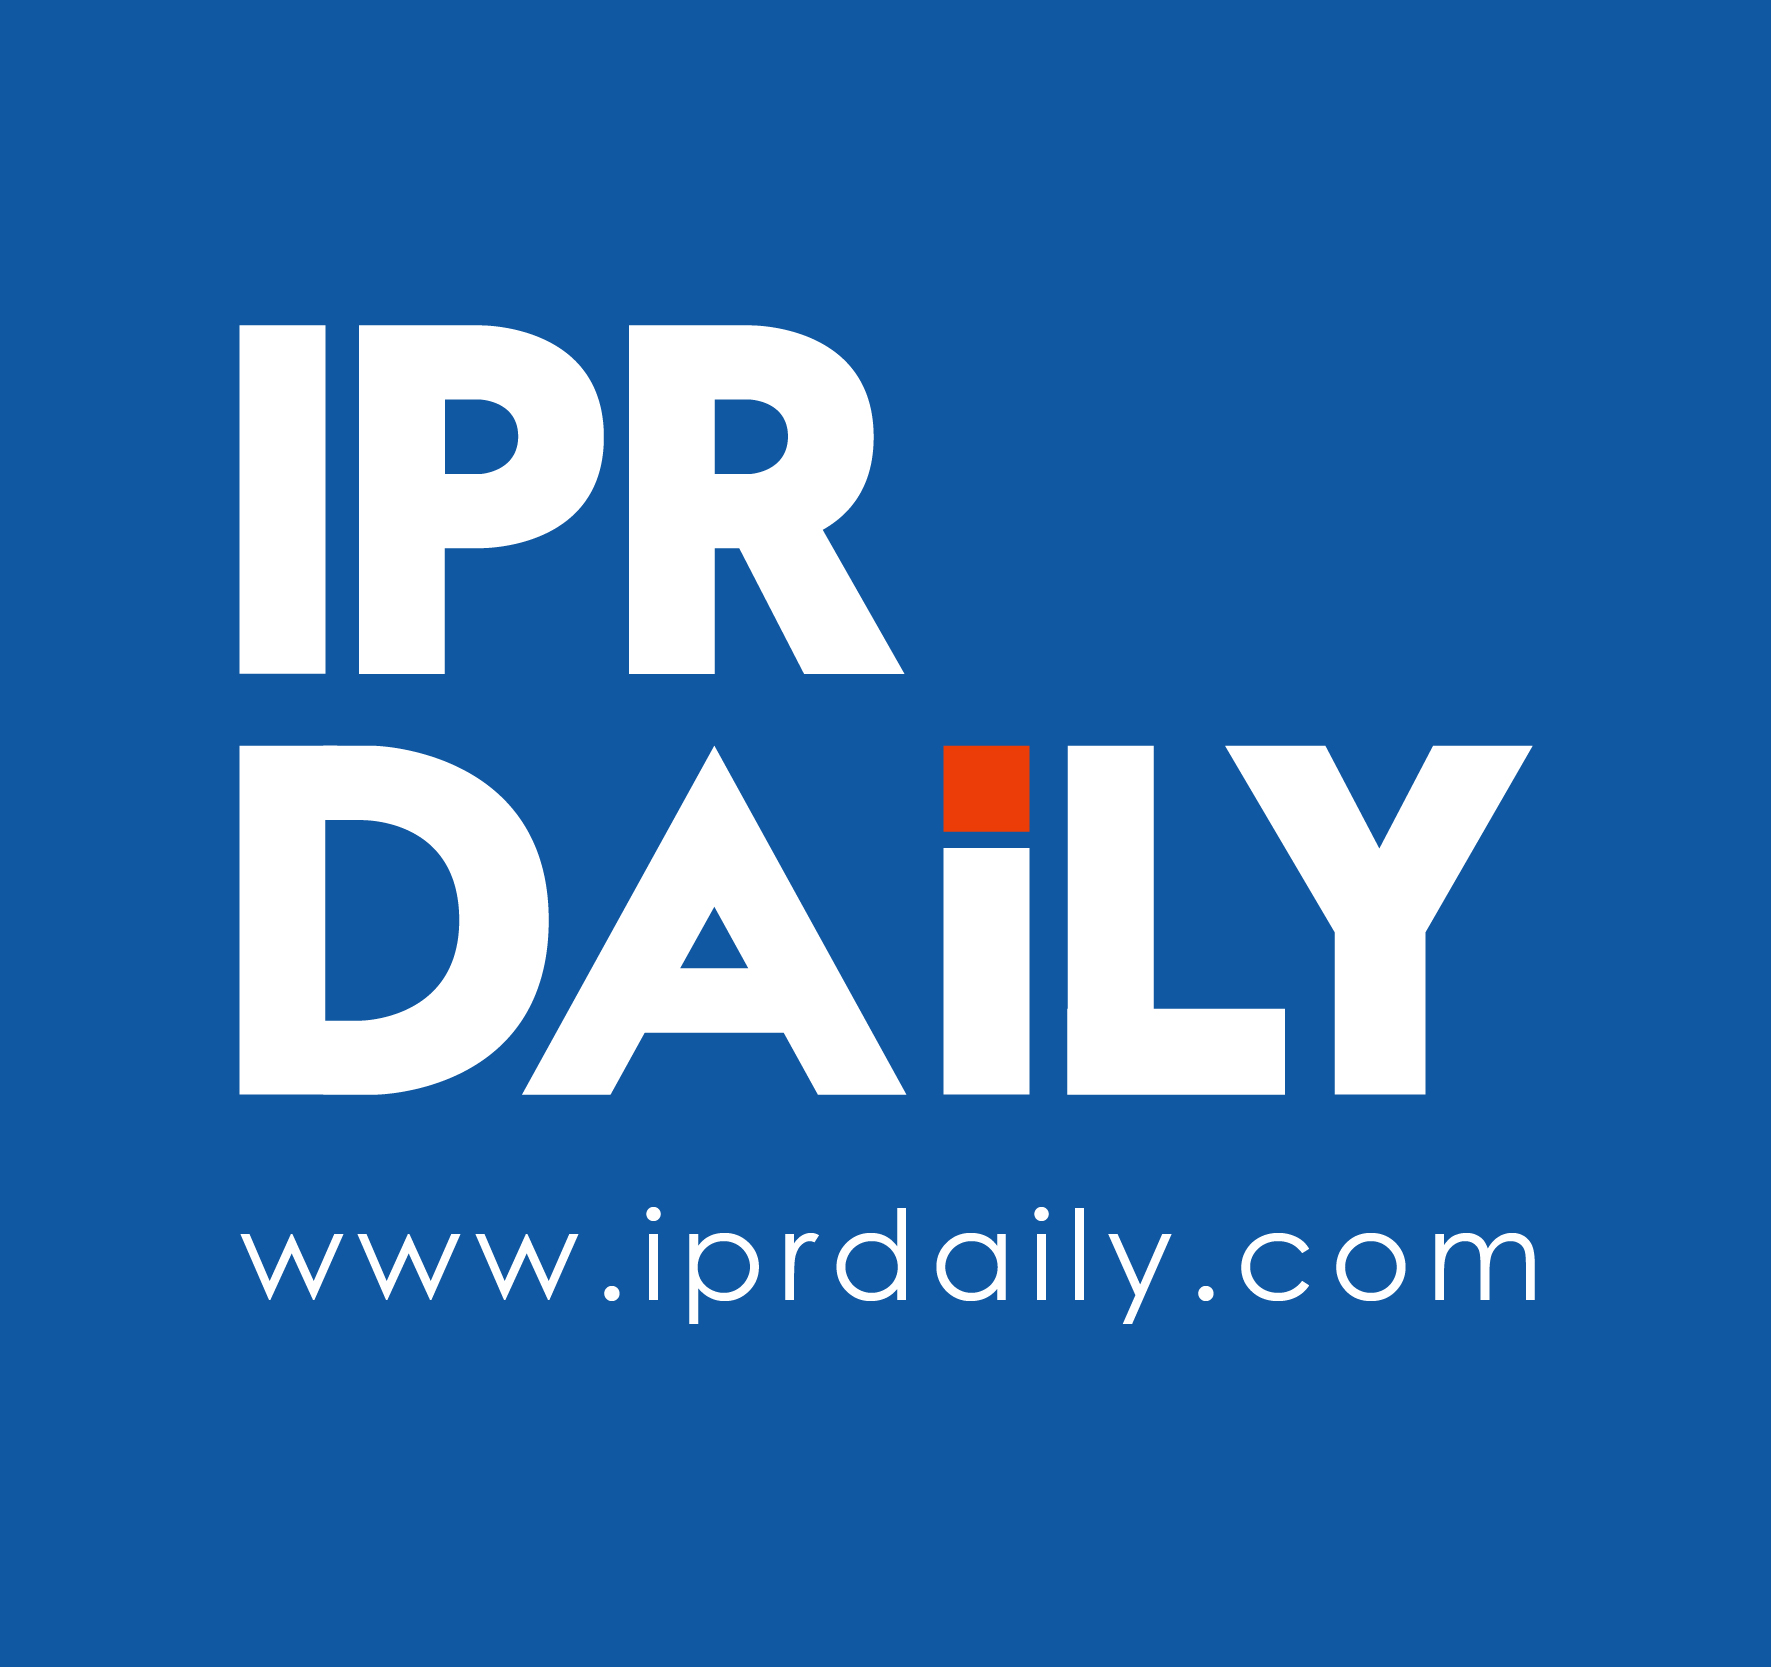 IPRdaily